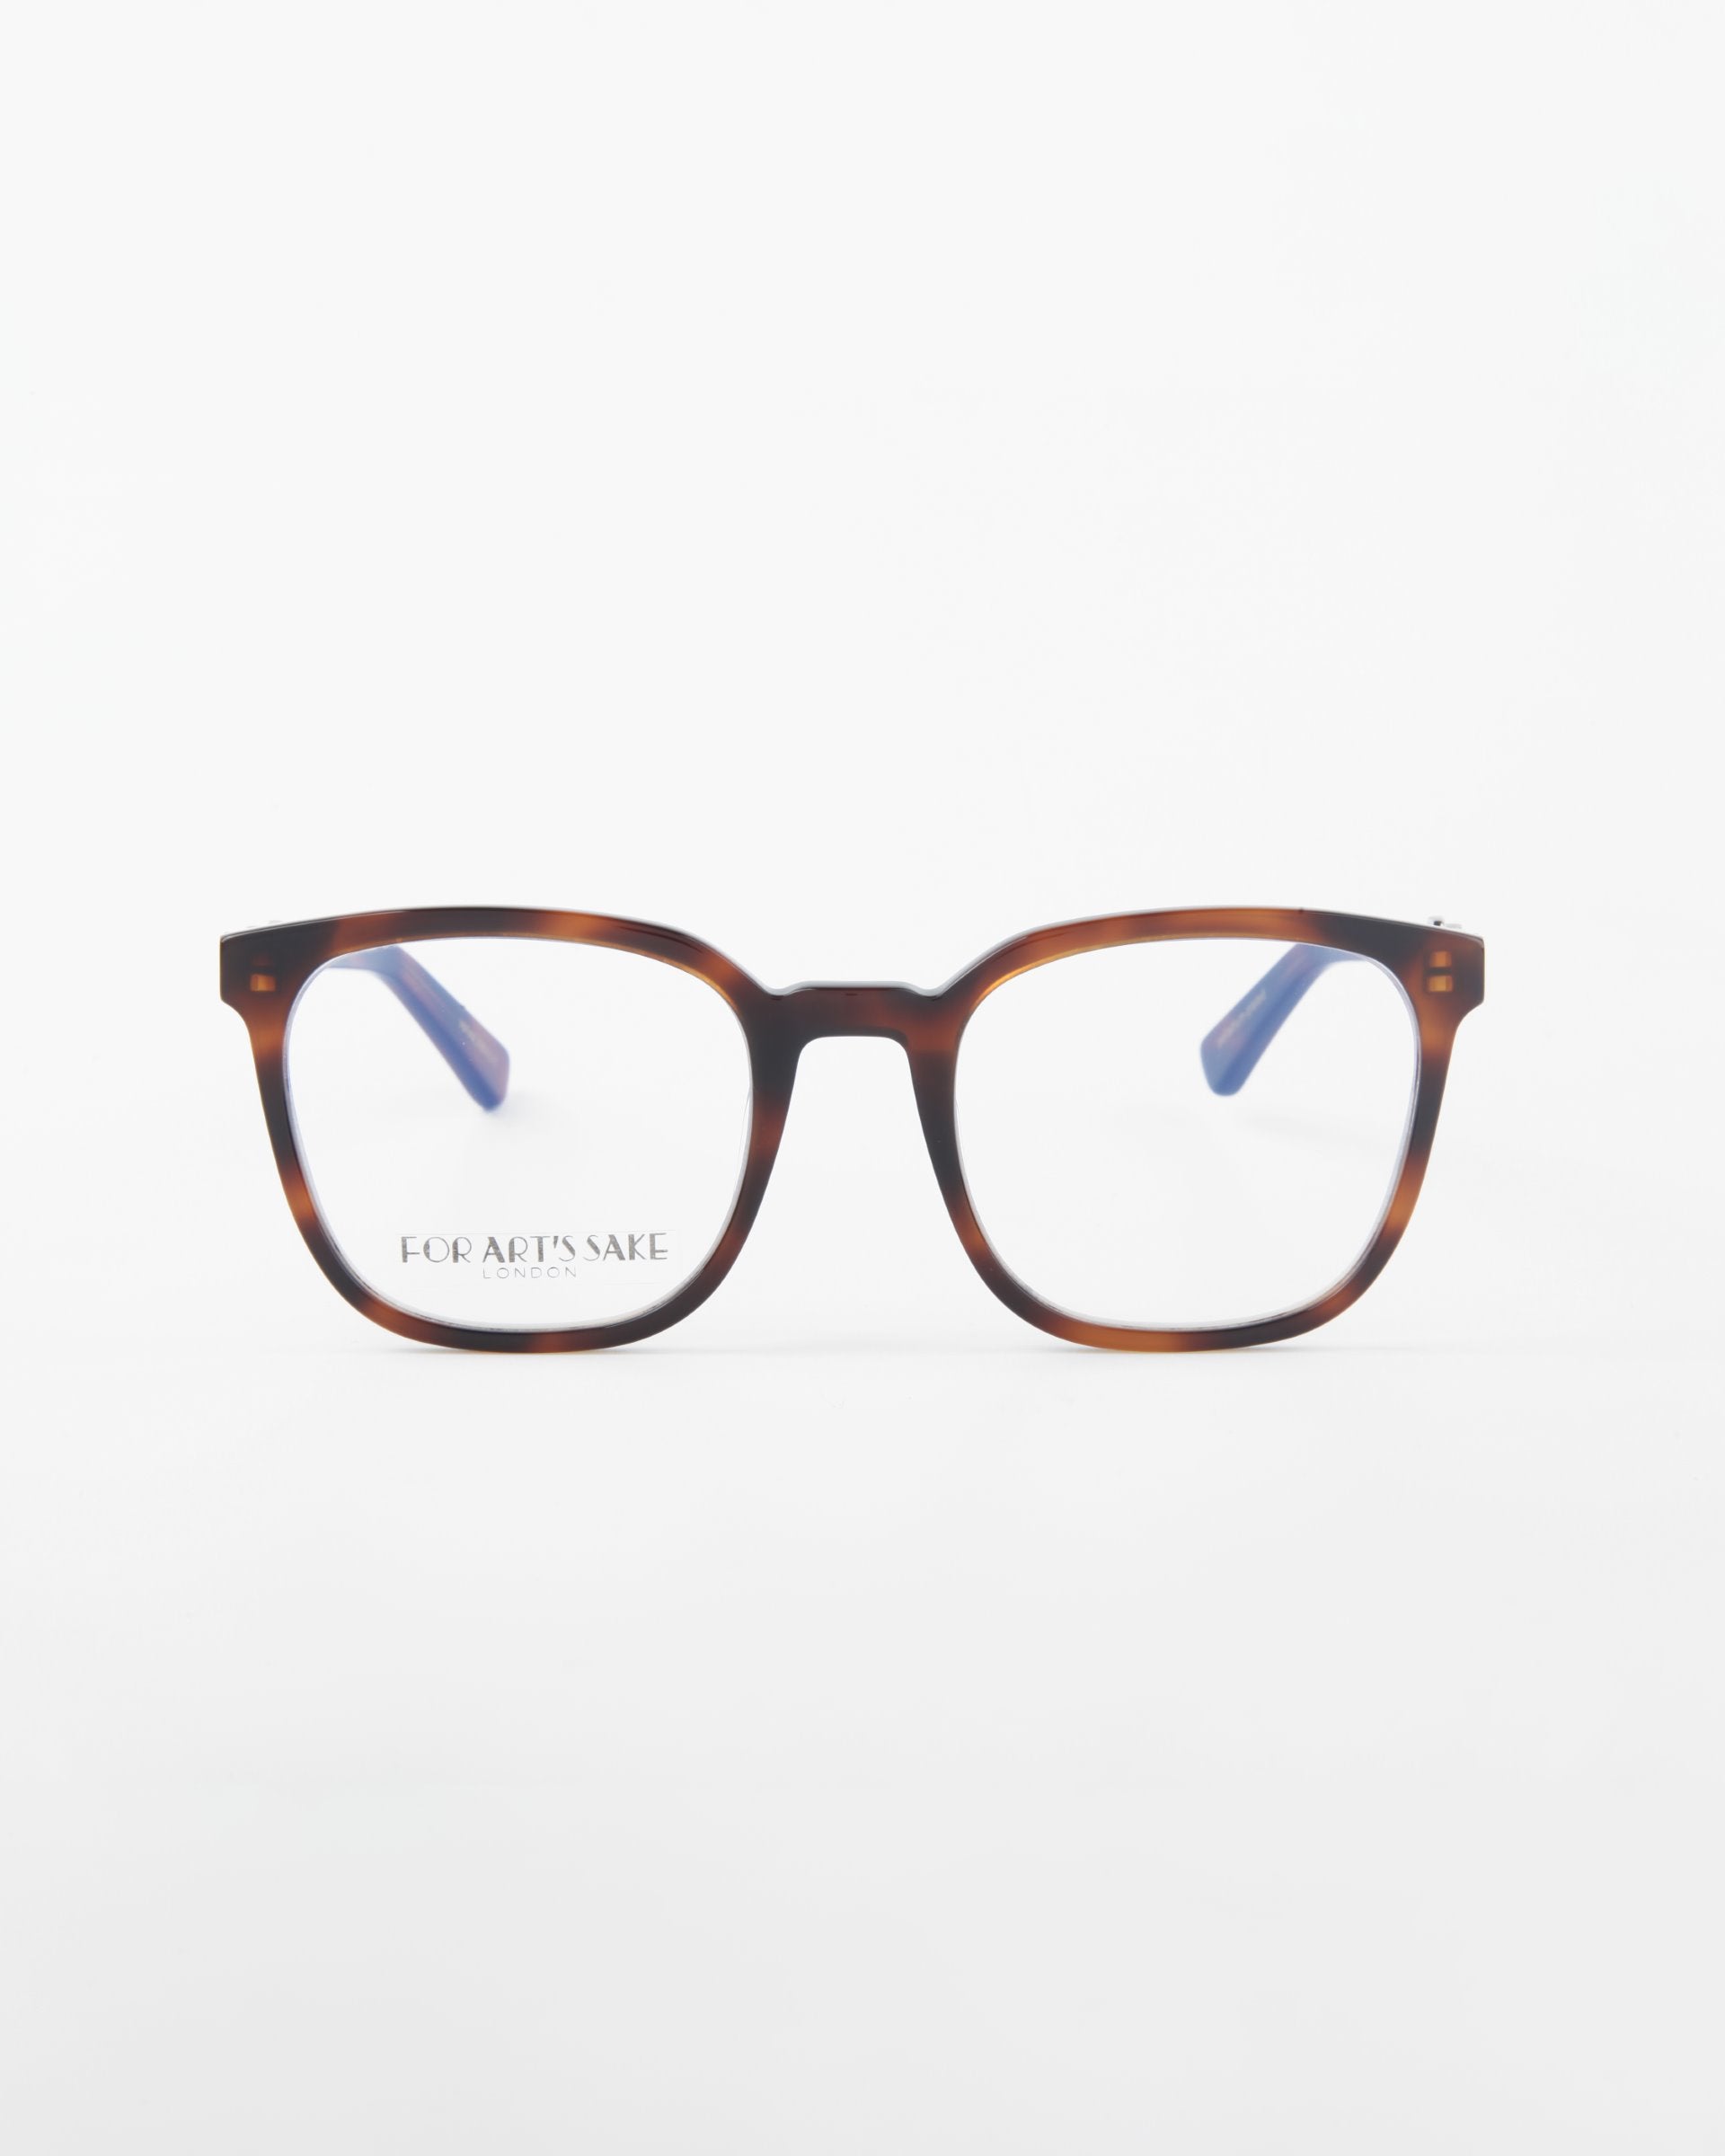 A pair of brown tortoiseshell rectangular eyeglasses with blue-tinted arms is displayed against a plain white background. Made from plant-based acetate, the phrase &quot;FOR ART&#39;S SAKE&quot; is visible on one of the lenses, highlighting their eco-friendly appeal. The model name for these eyeglasses is Molten by For Art&#39;s Sake®.